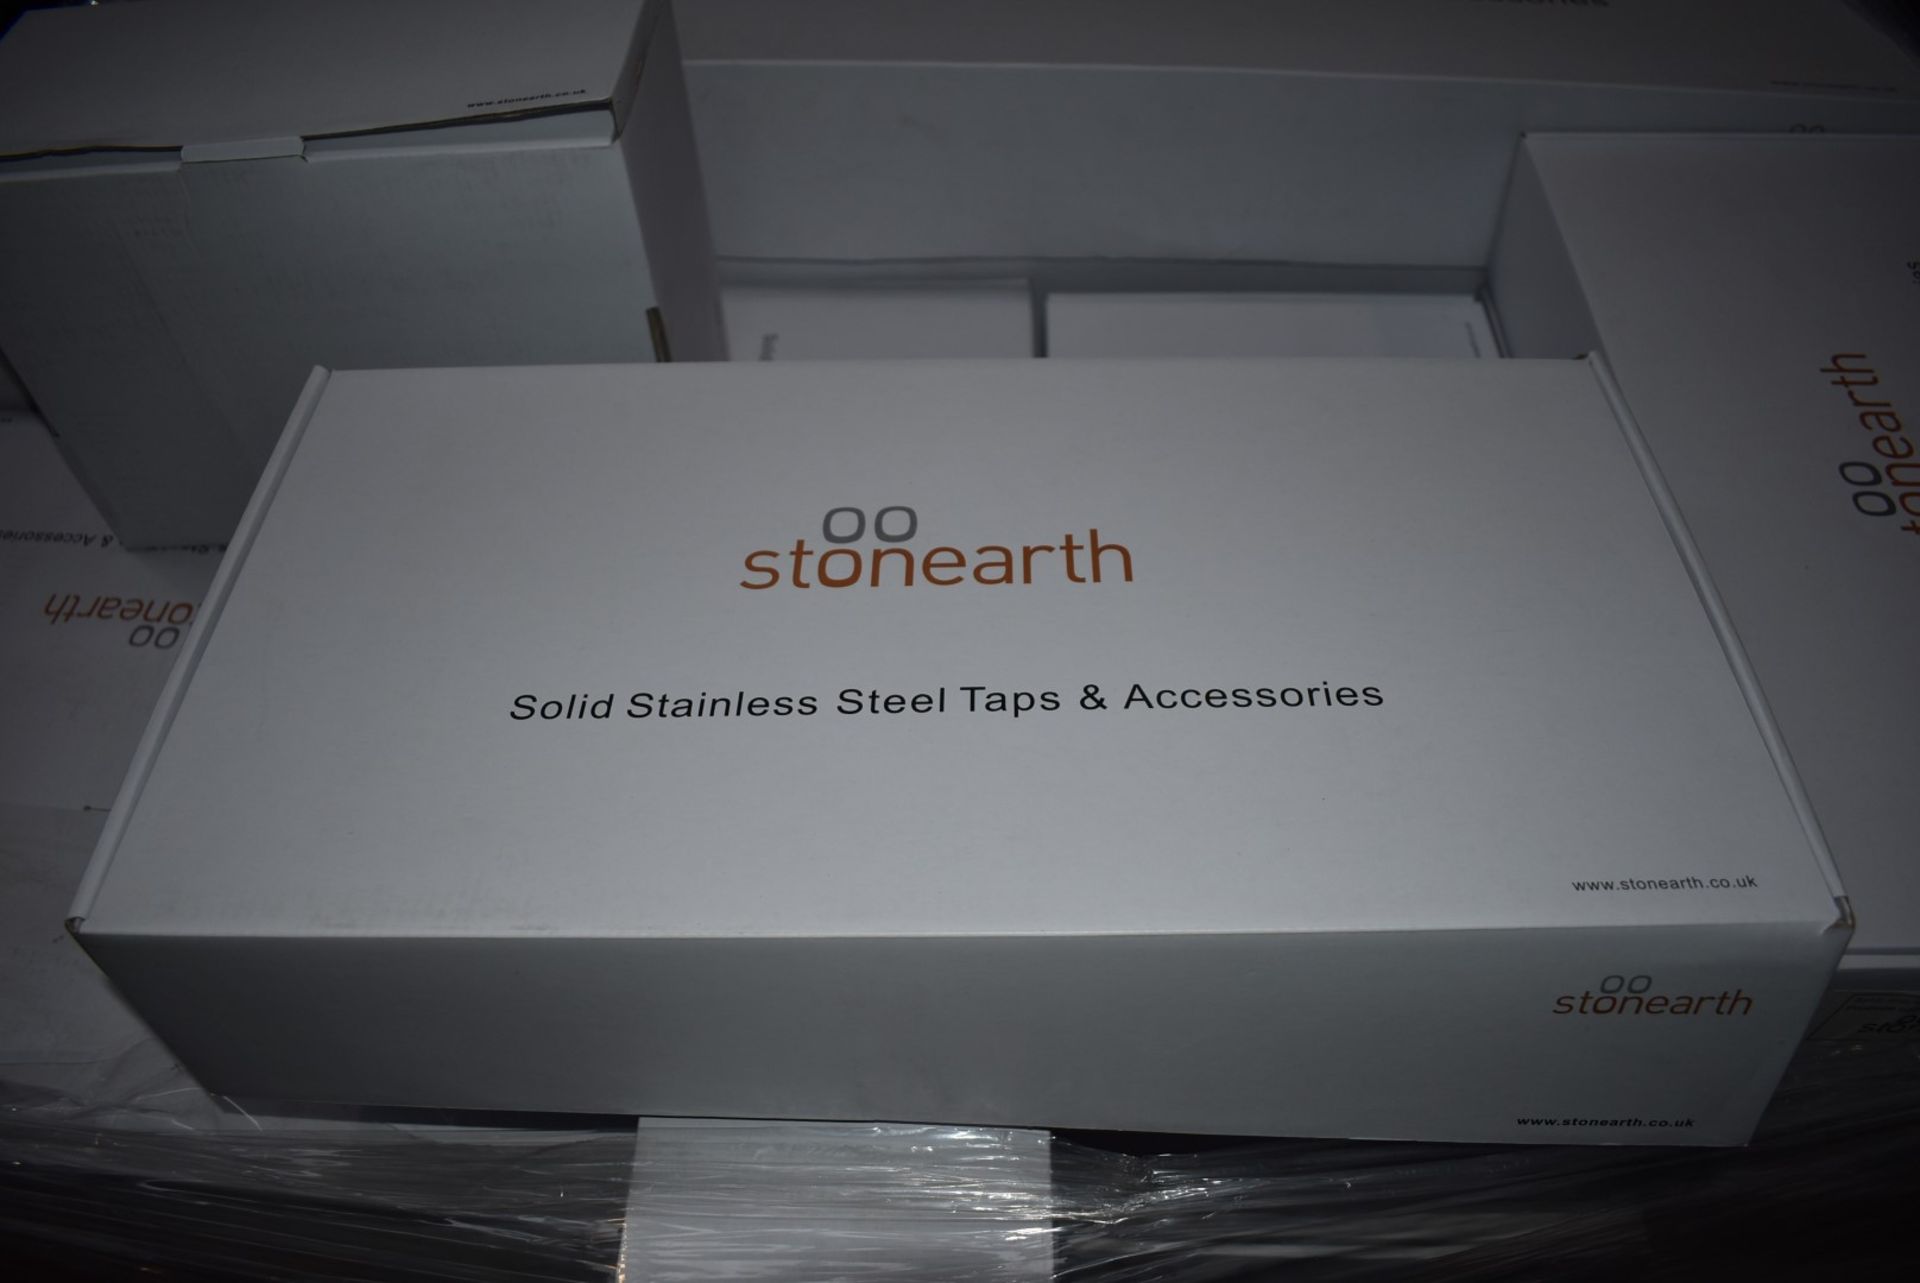 1 x Stonearth Bath Waste Kit With Stainless Steel Covers - Brand New & Boxed - RRP £125 - Ref: TP893 - Image 7 of 7